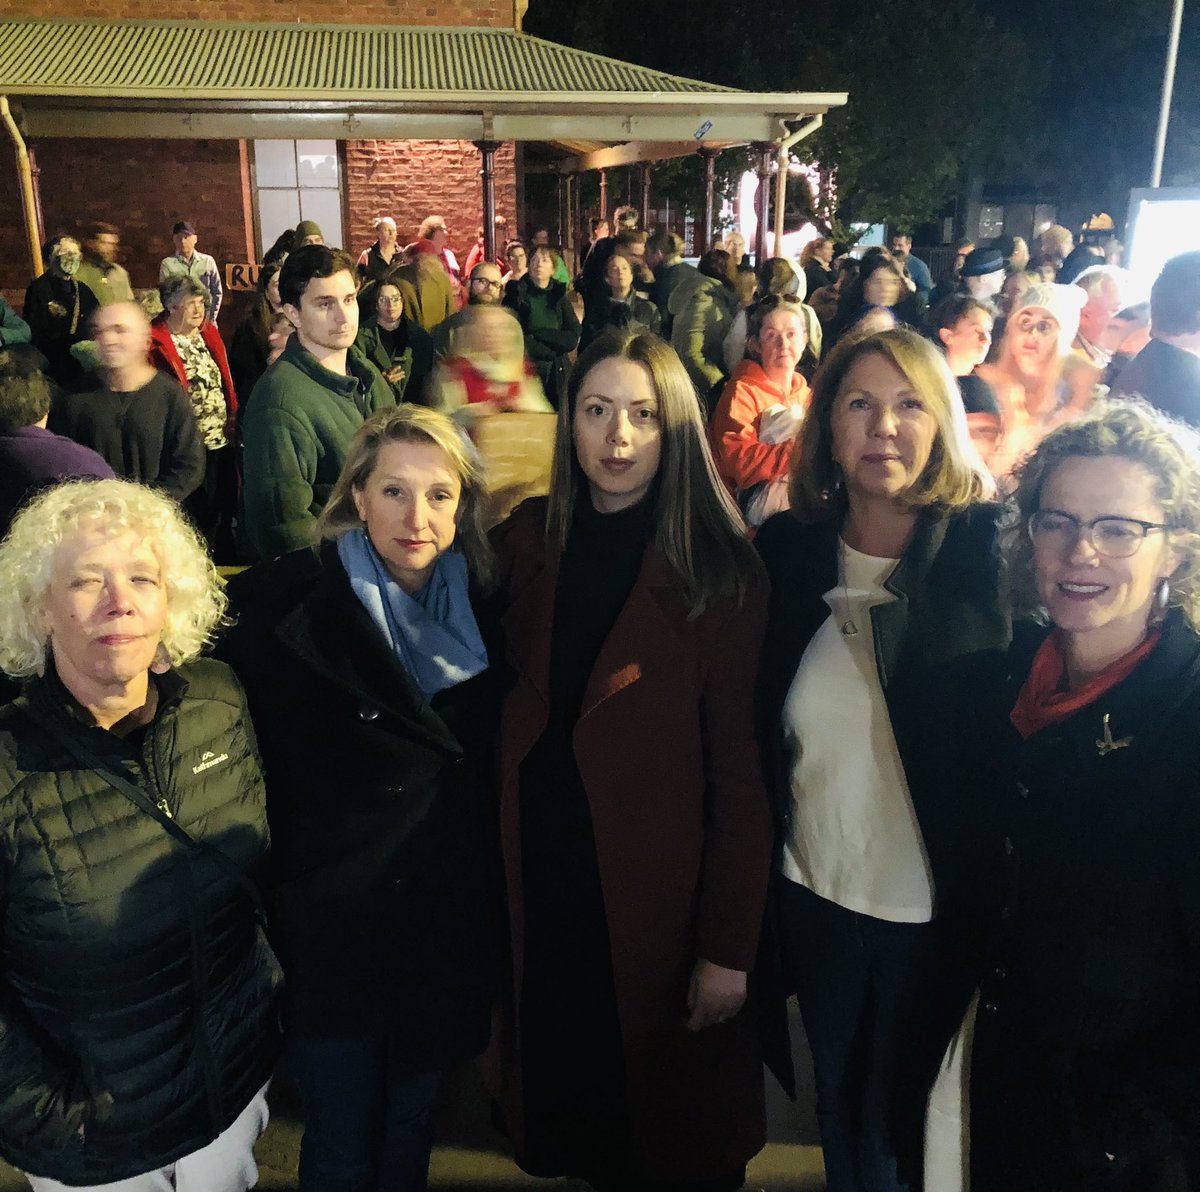 A privilege to support the Ballarat community last night. “We can make a choice... We can chose to not use violence. And we need the men in our community to stand up and do exactly that.” Thank you to the men who marched with women last night. Together we can make change happen